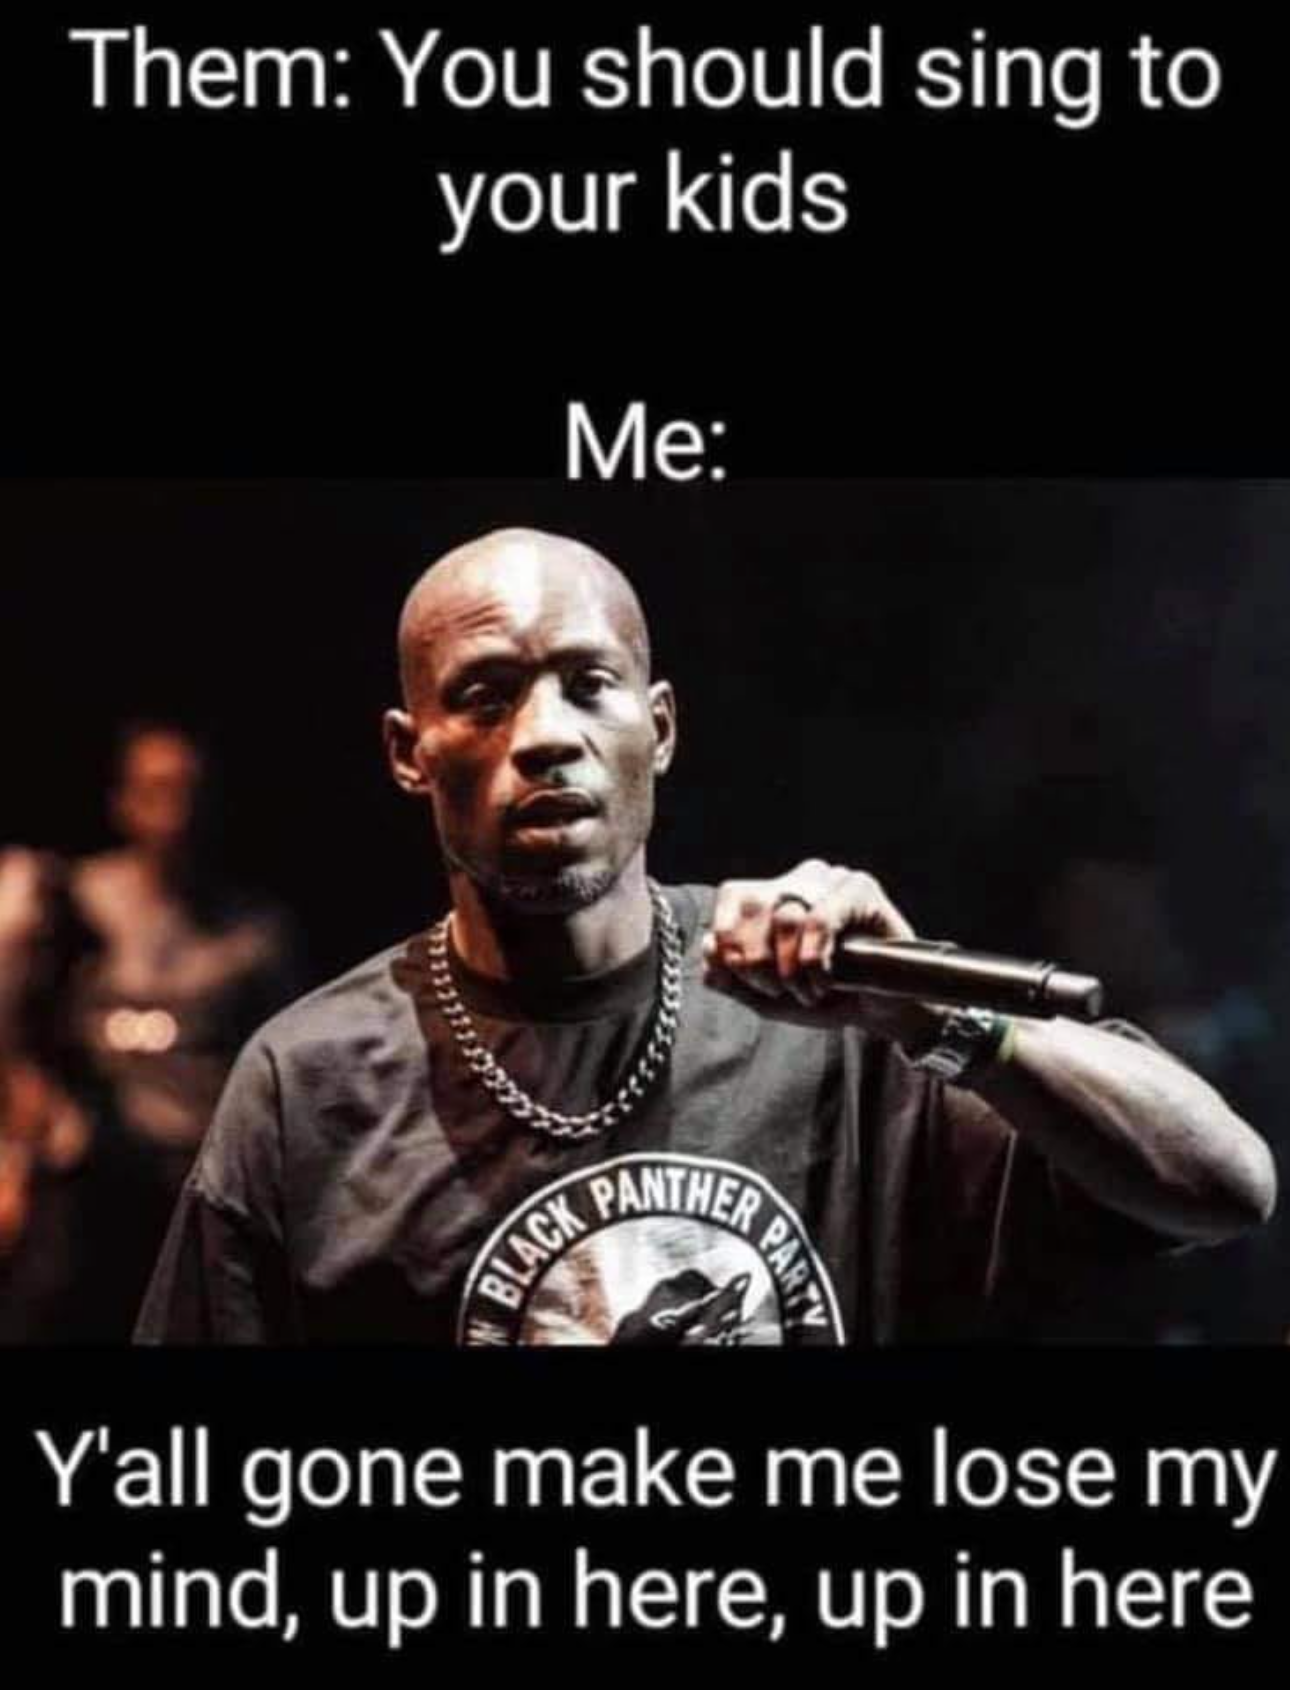 DMX - Them You should sing to your kids Me Panther Black Y'all gone make me lose my mind, up in here, up in here